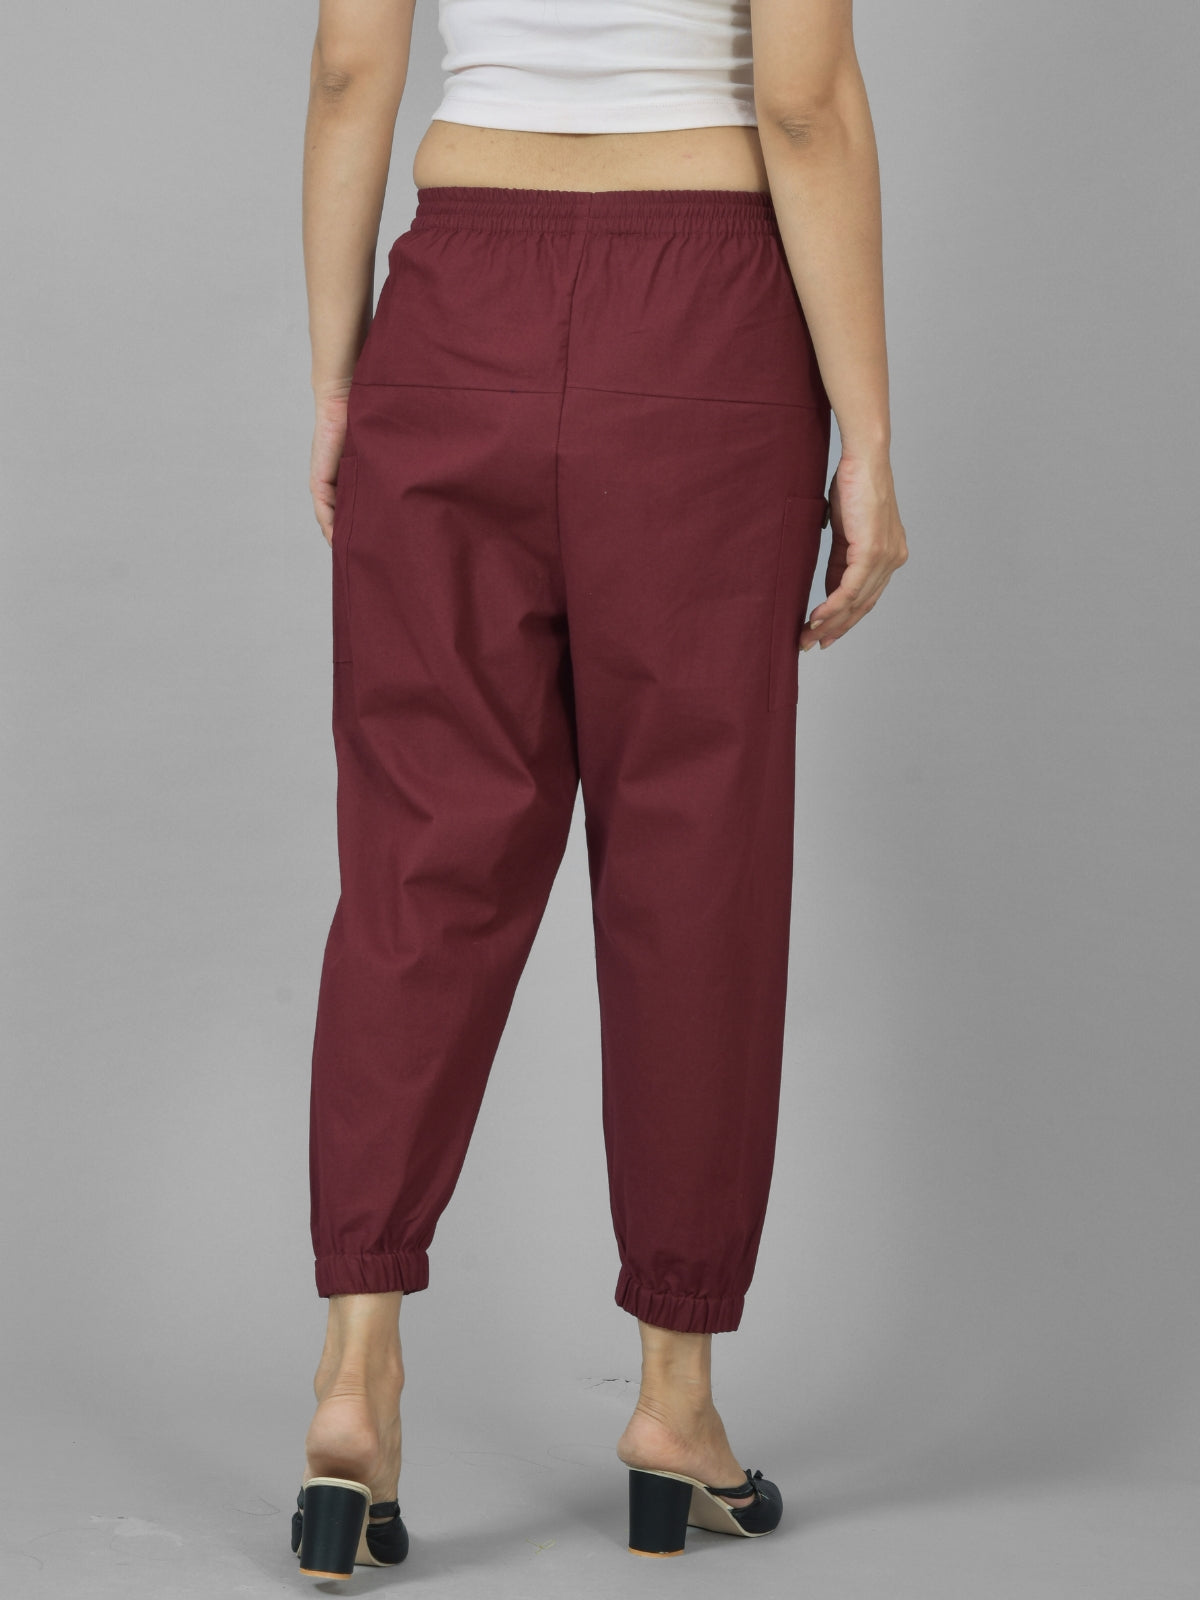 Combo Pack Of Womens Melange Grey And Maroon Four Pocket Cotton Cargo Pants